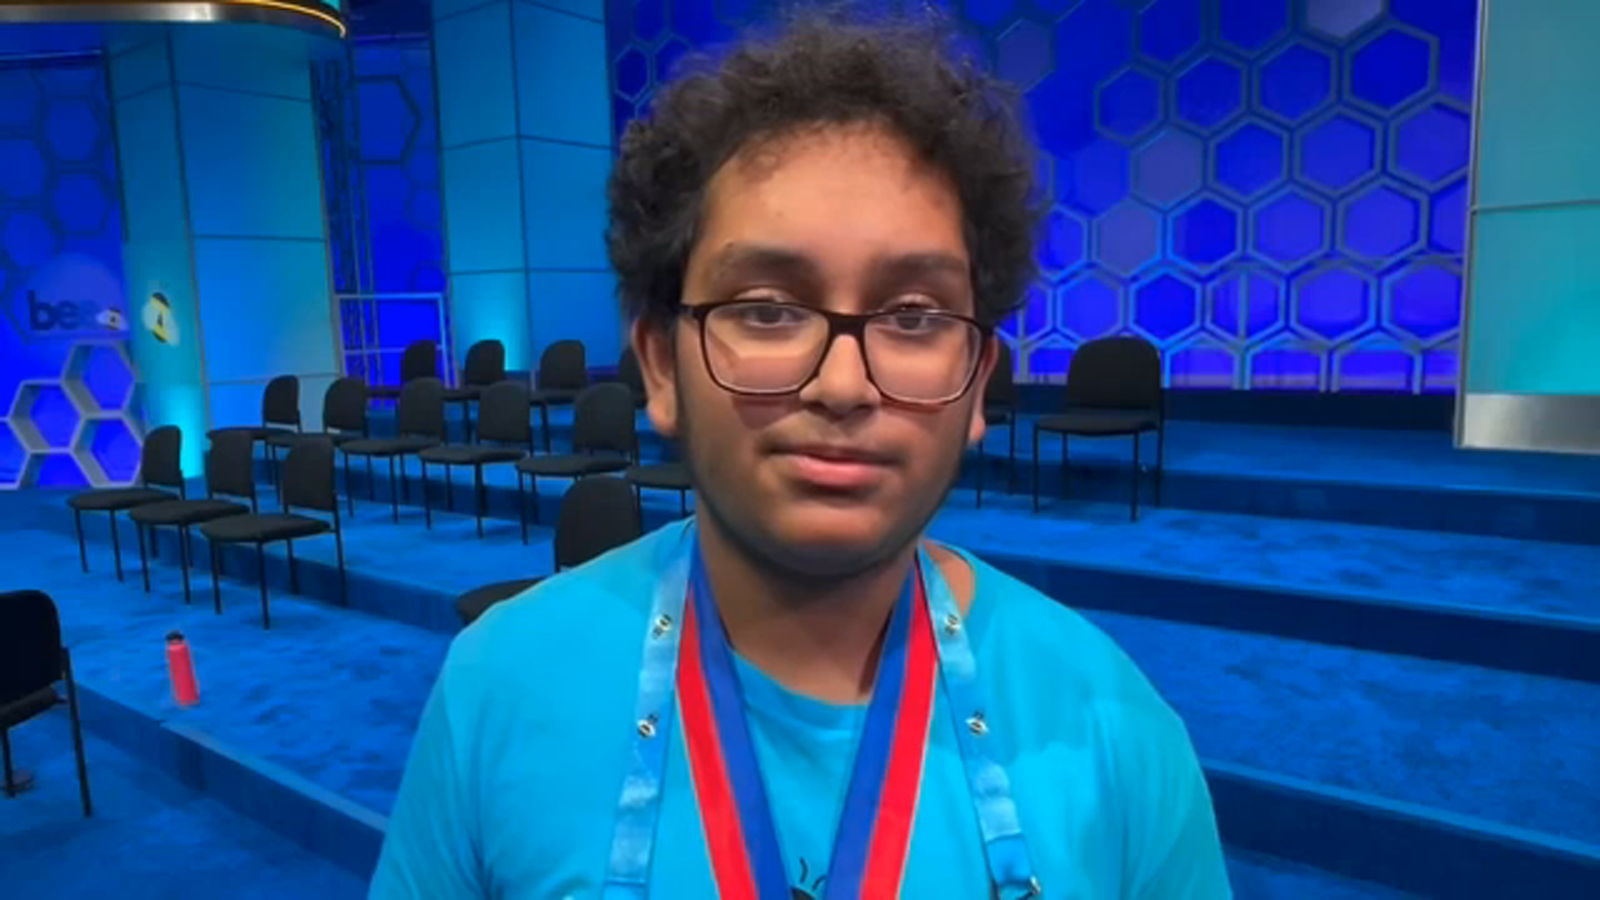 Merced student heading to final round of Scripps National Spelling Bee